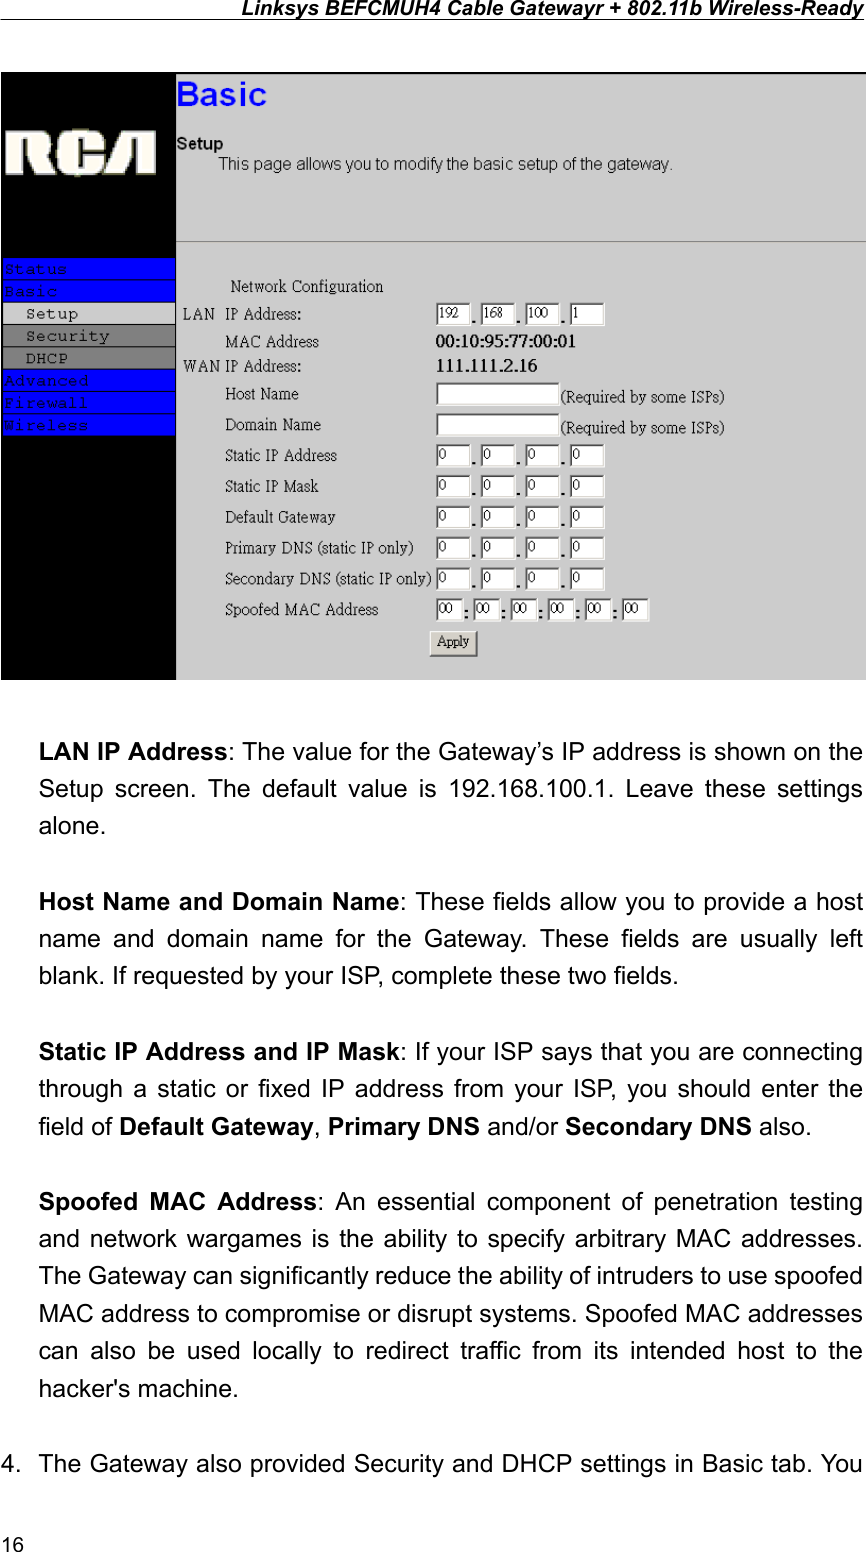 Linksys BEFCMUH4 Cable Gatewayr + 802.11b Wireless-Ready   LAN IP Address: The value for the Gateway’s IP address is shown on the Setup screen. The default value is 192.168.100.1. Leave these settings alone.  Host Name and Domain Name: These fields allow you to provide a host name and domain name for the Gateway. These fields are usually left blank. If requested by your ISP, complete these two fields.  Static IP Address and IP Mask: If your ISP says that you are connecting through a static or fixed IP address from your ISP, you should enter the field of Default Gateway, Primary DNS and/or Secondary DNS also.  Spoofed MAC Address: An essential component of penetration testing and network wargames is the ability to specify arbitrary MAC addresses. The Gateway can significantly reduce the ability of intruders to use spoofed MAC address to compromise or disrupt systems. Spoofed MAC addresses can also be used locally to redirect traffic from its intended host to the hacker&apos;s machine.  4.  The Gateway also provided Security and DHCP settings in Basic tab. You 16 